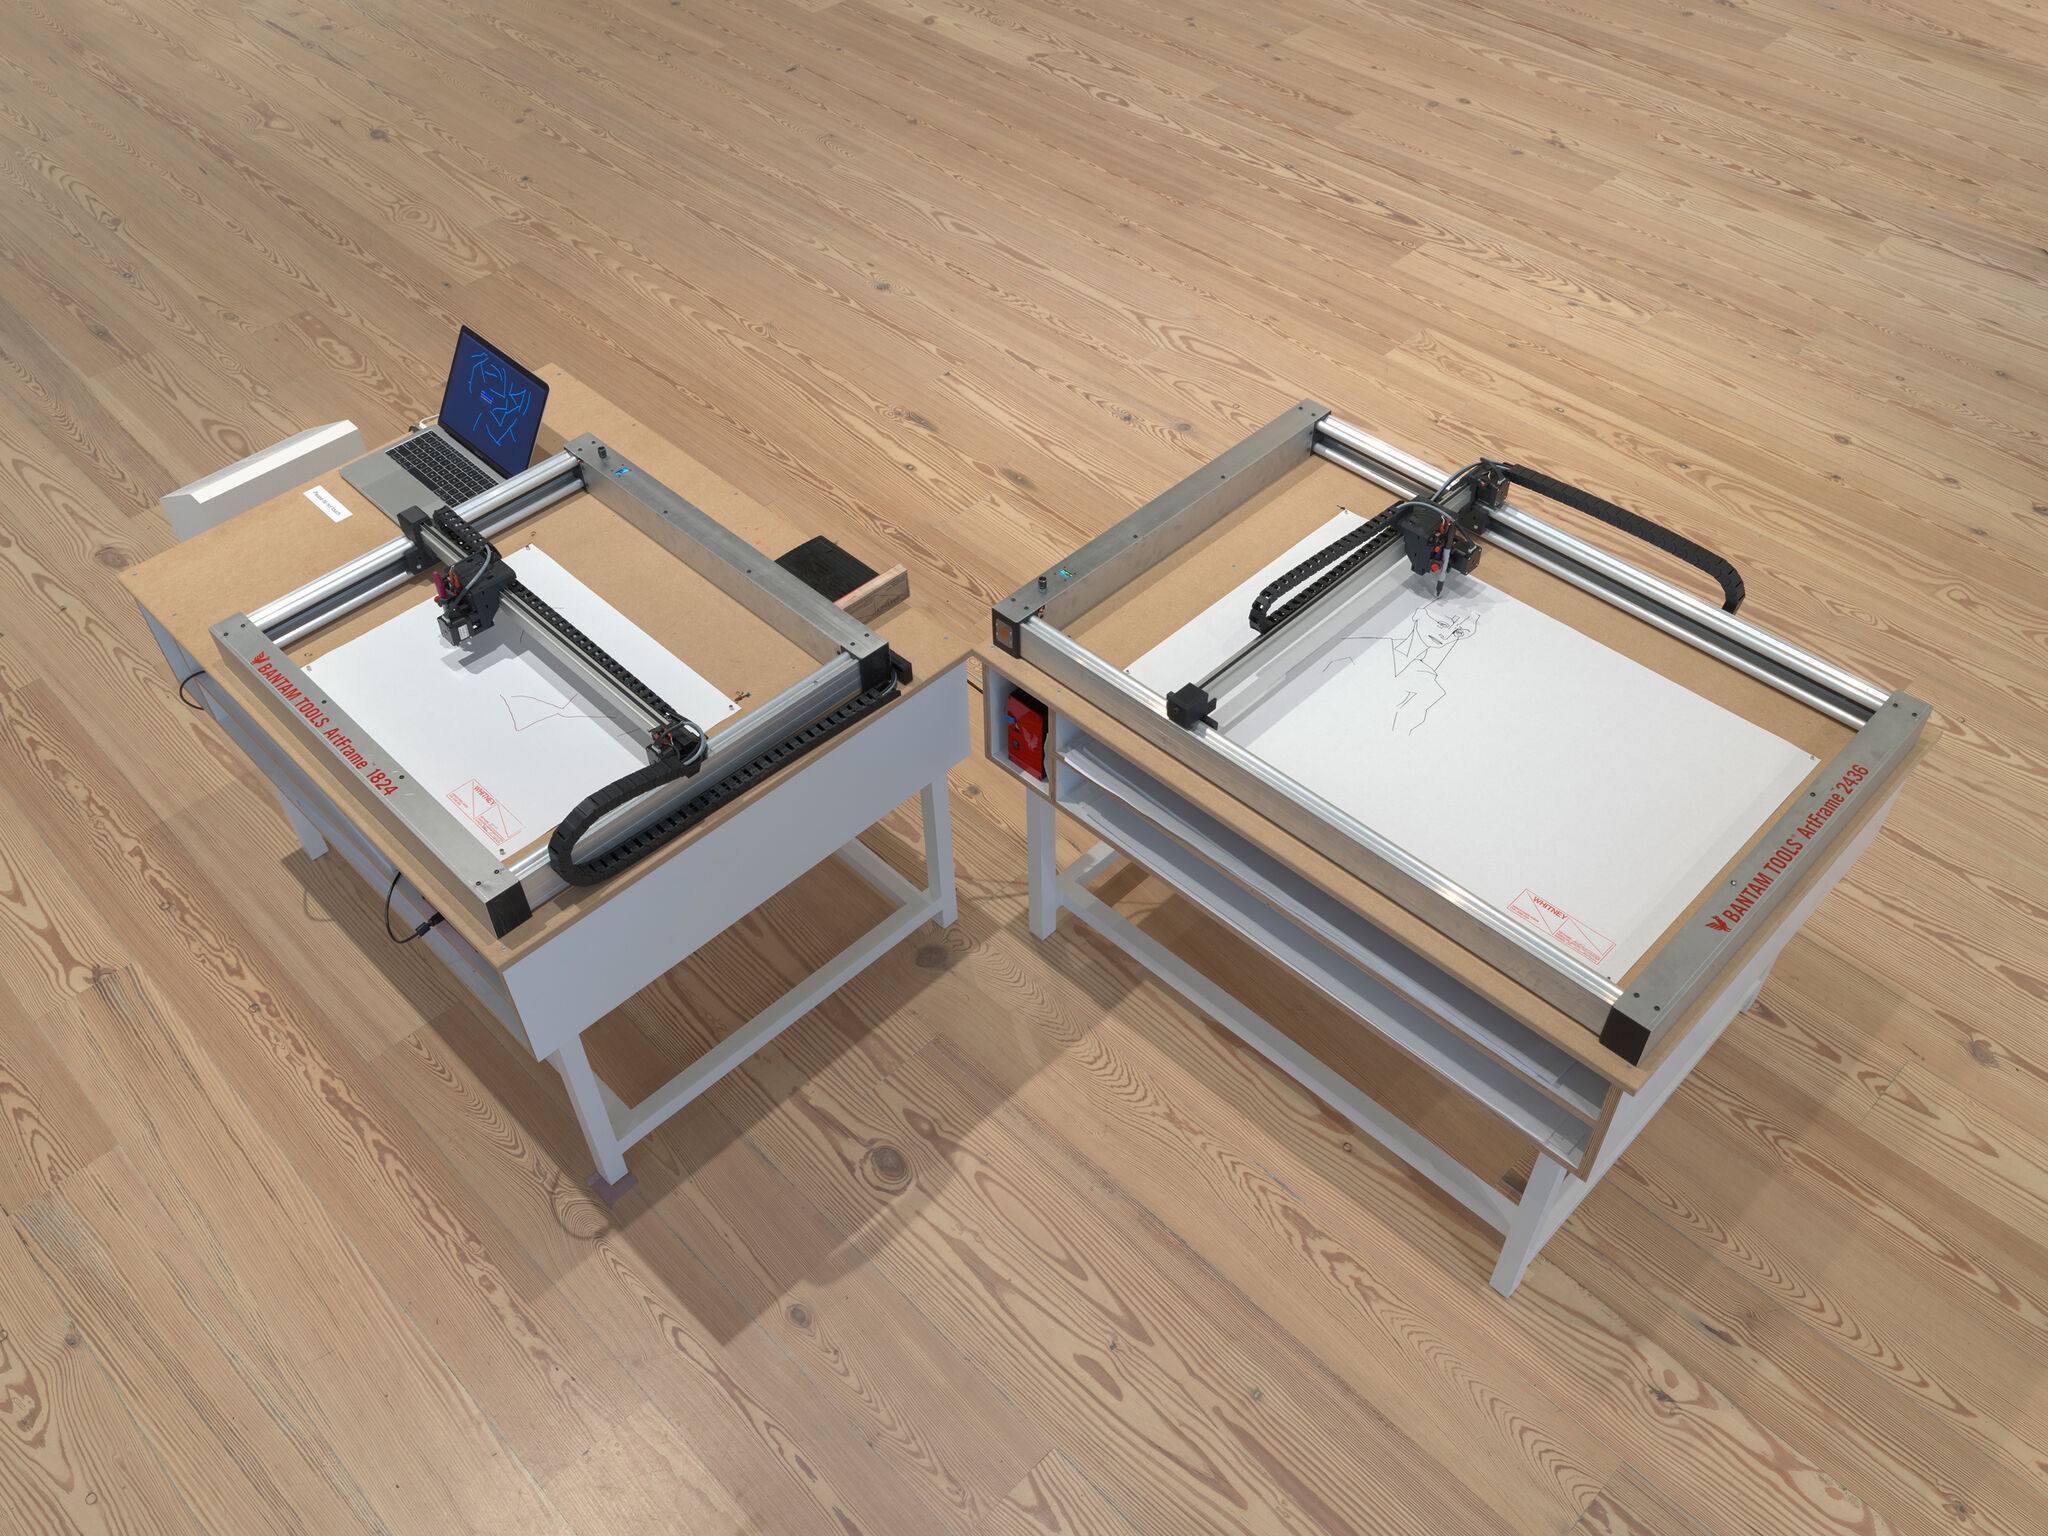 Two robotic drawing machines sketching on paper atop tables in a room with wooden flooring.